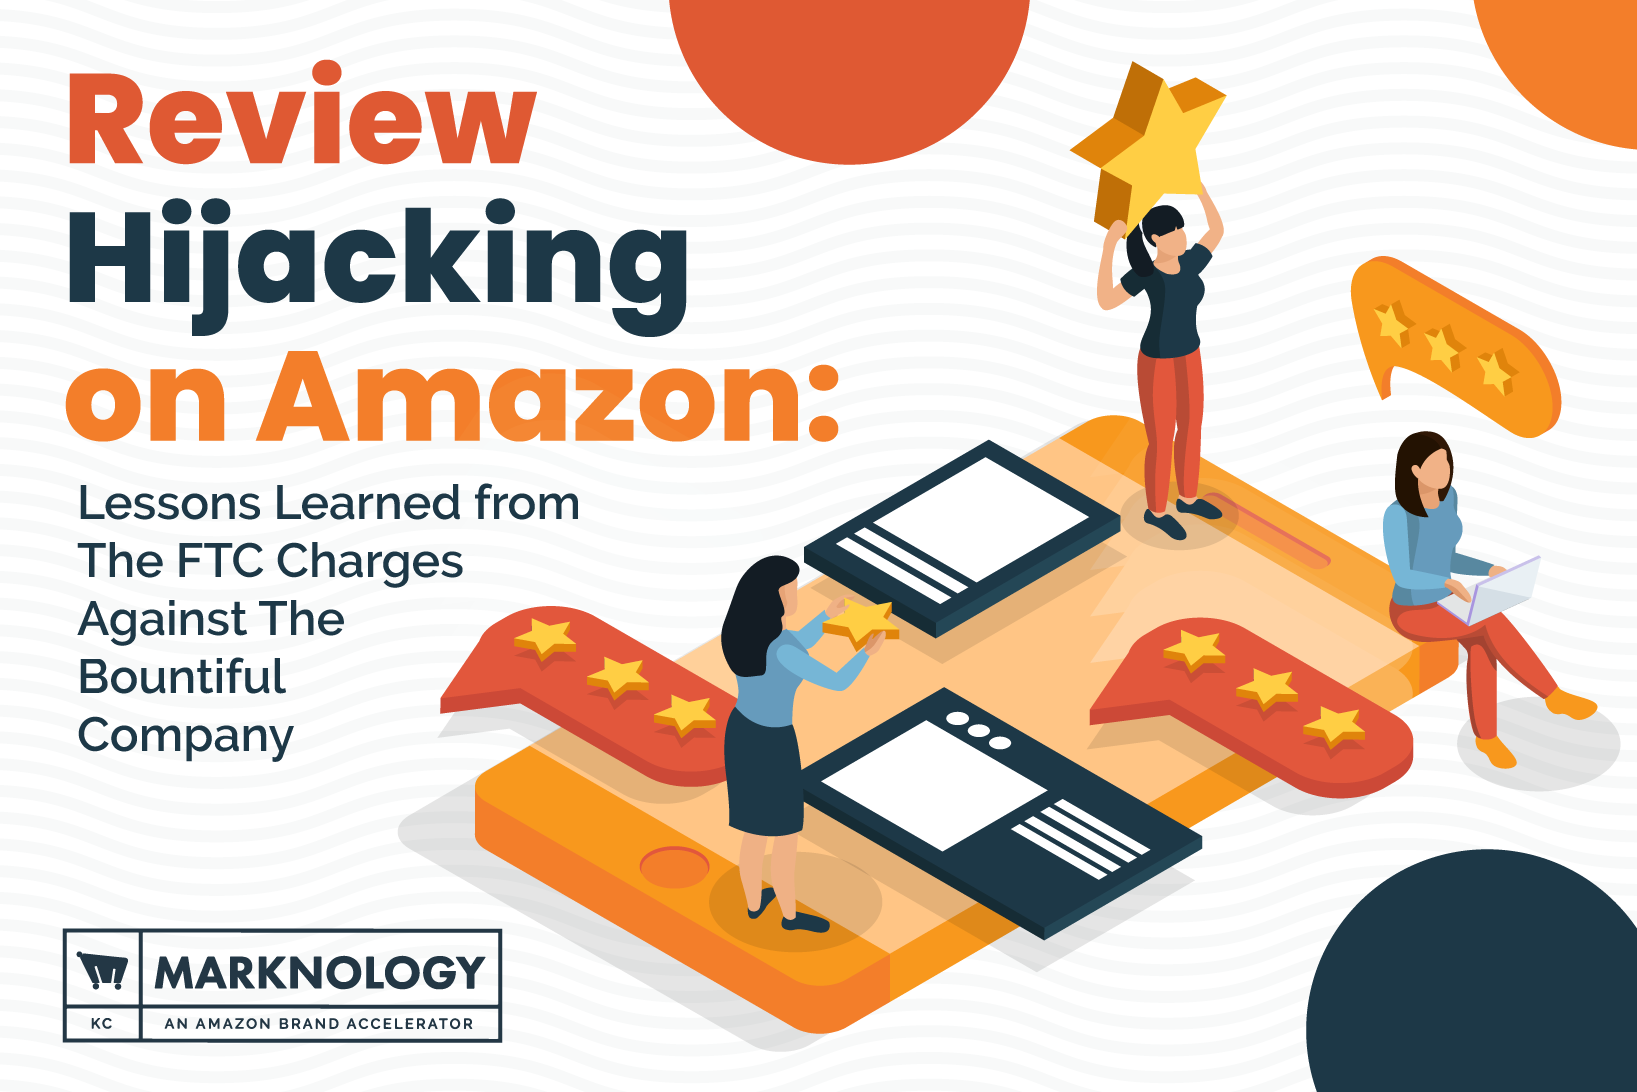 Review Hijacking on Amazon: Lessons Learned from The FTC Charges Against The Bountiful Company